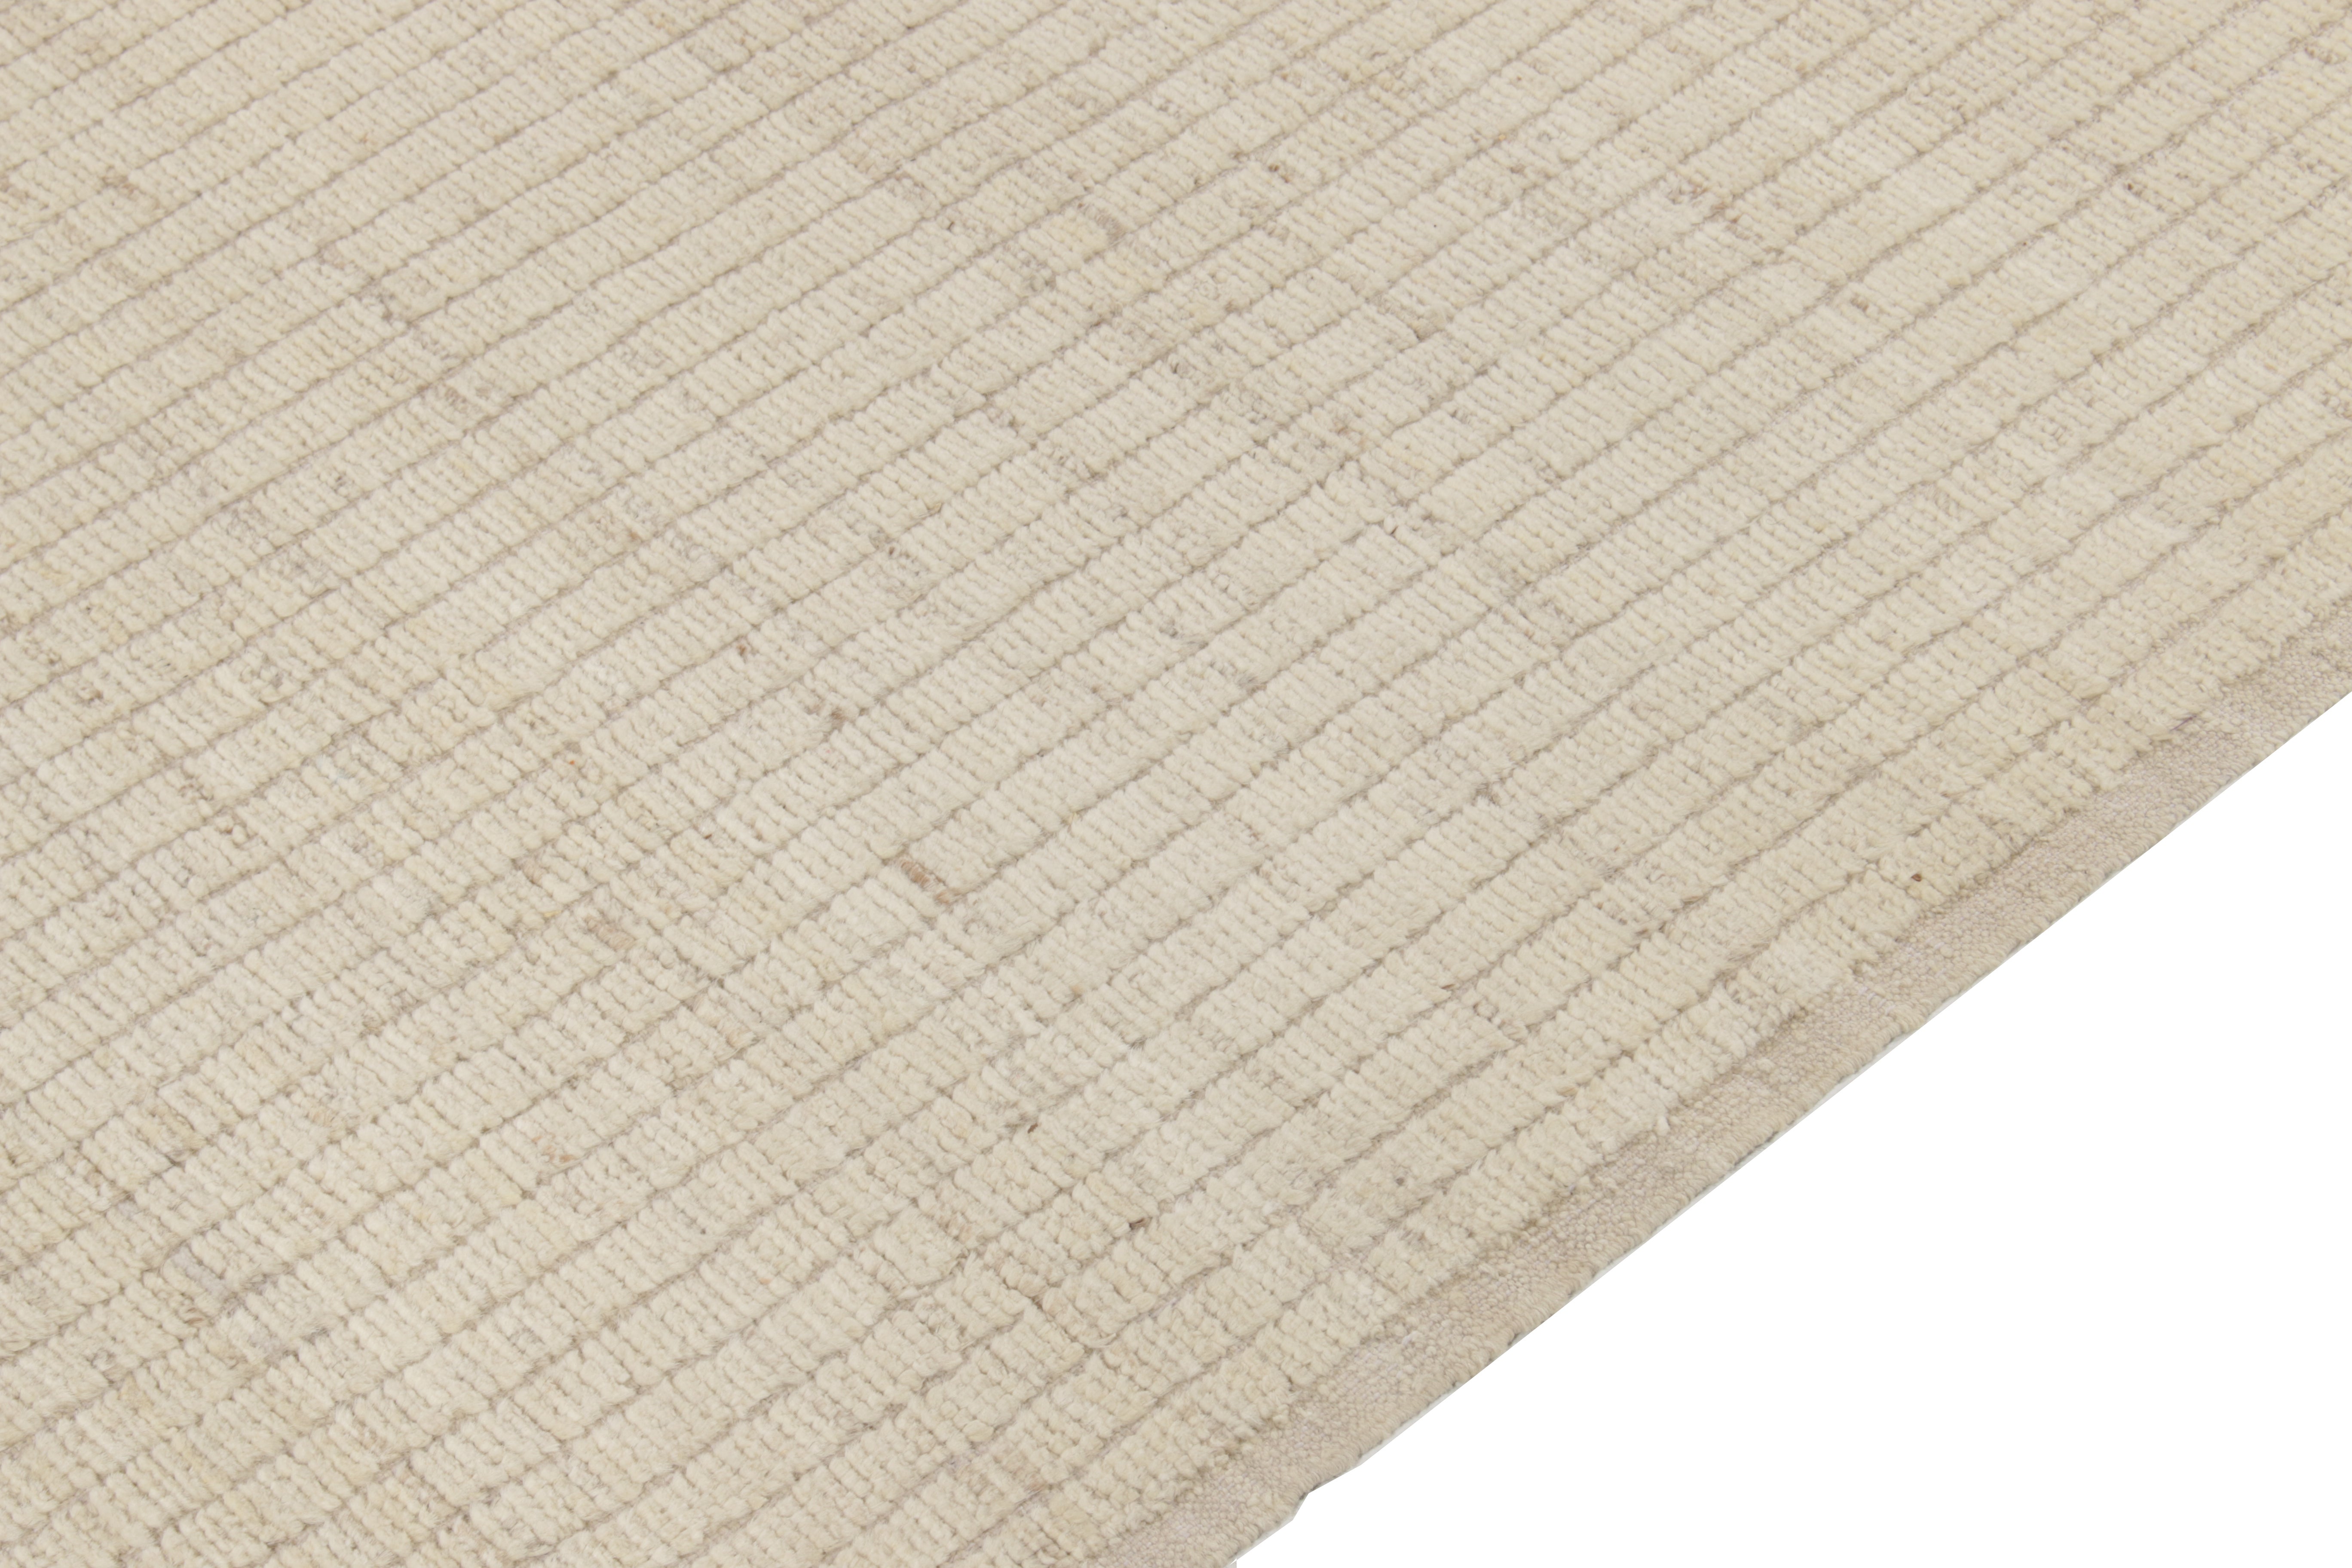 Rug & Kilim's Contemporary Rug in off White, Beige High-Low Geometric Pattern For Sale